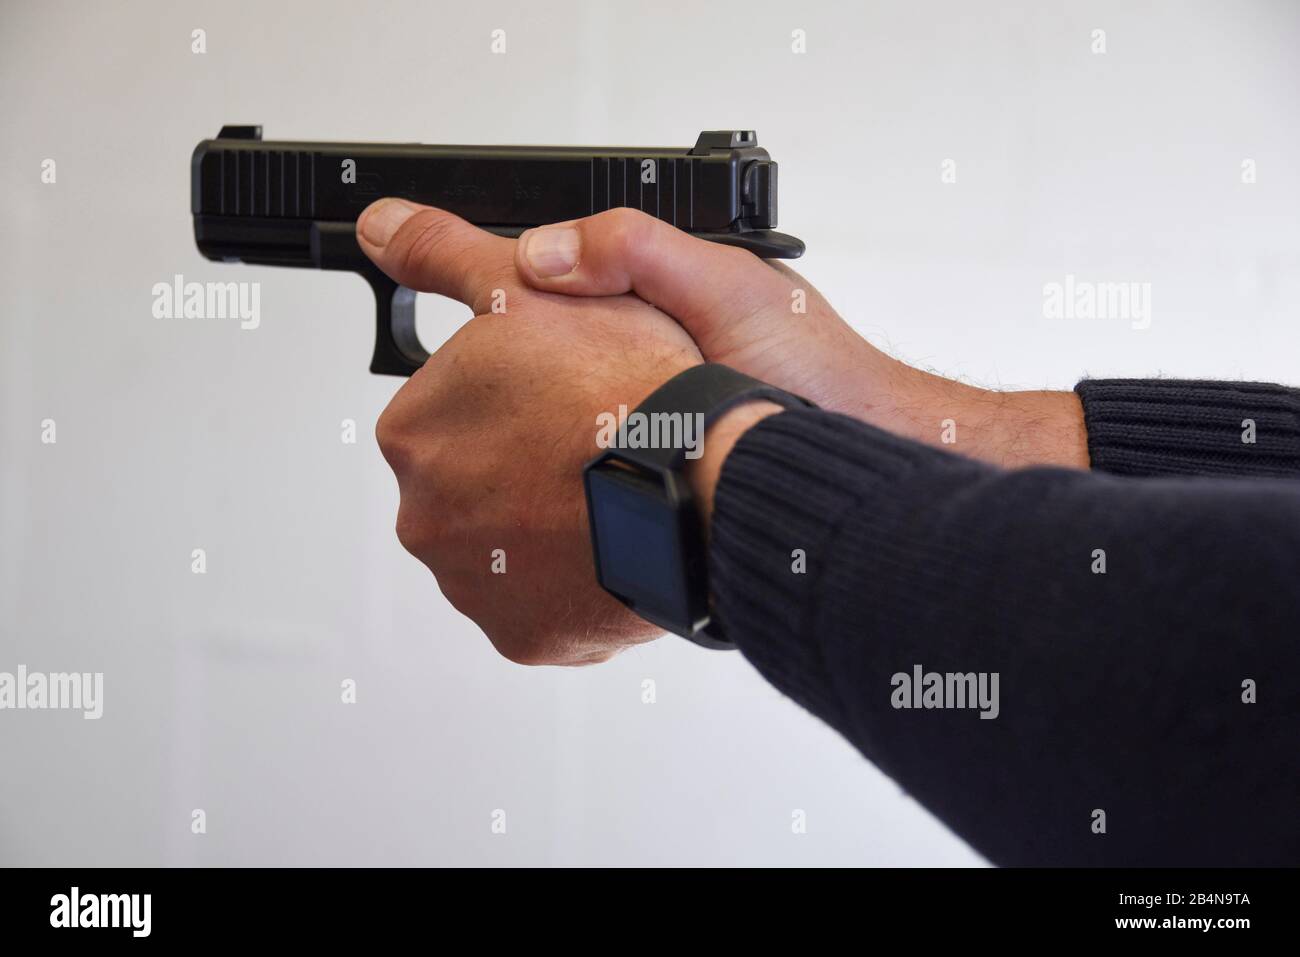 A police officer aims at a shooting range with a 'Glock 46' pistol. Stock Photo